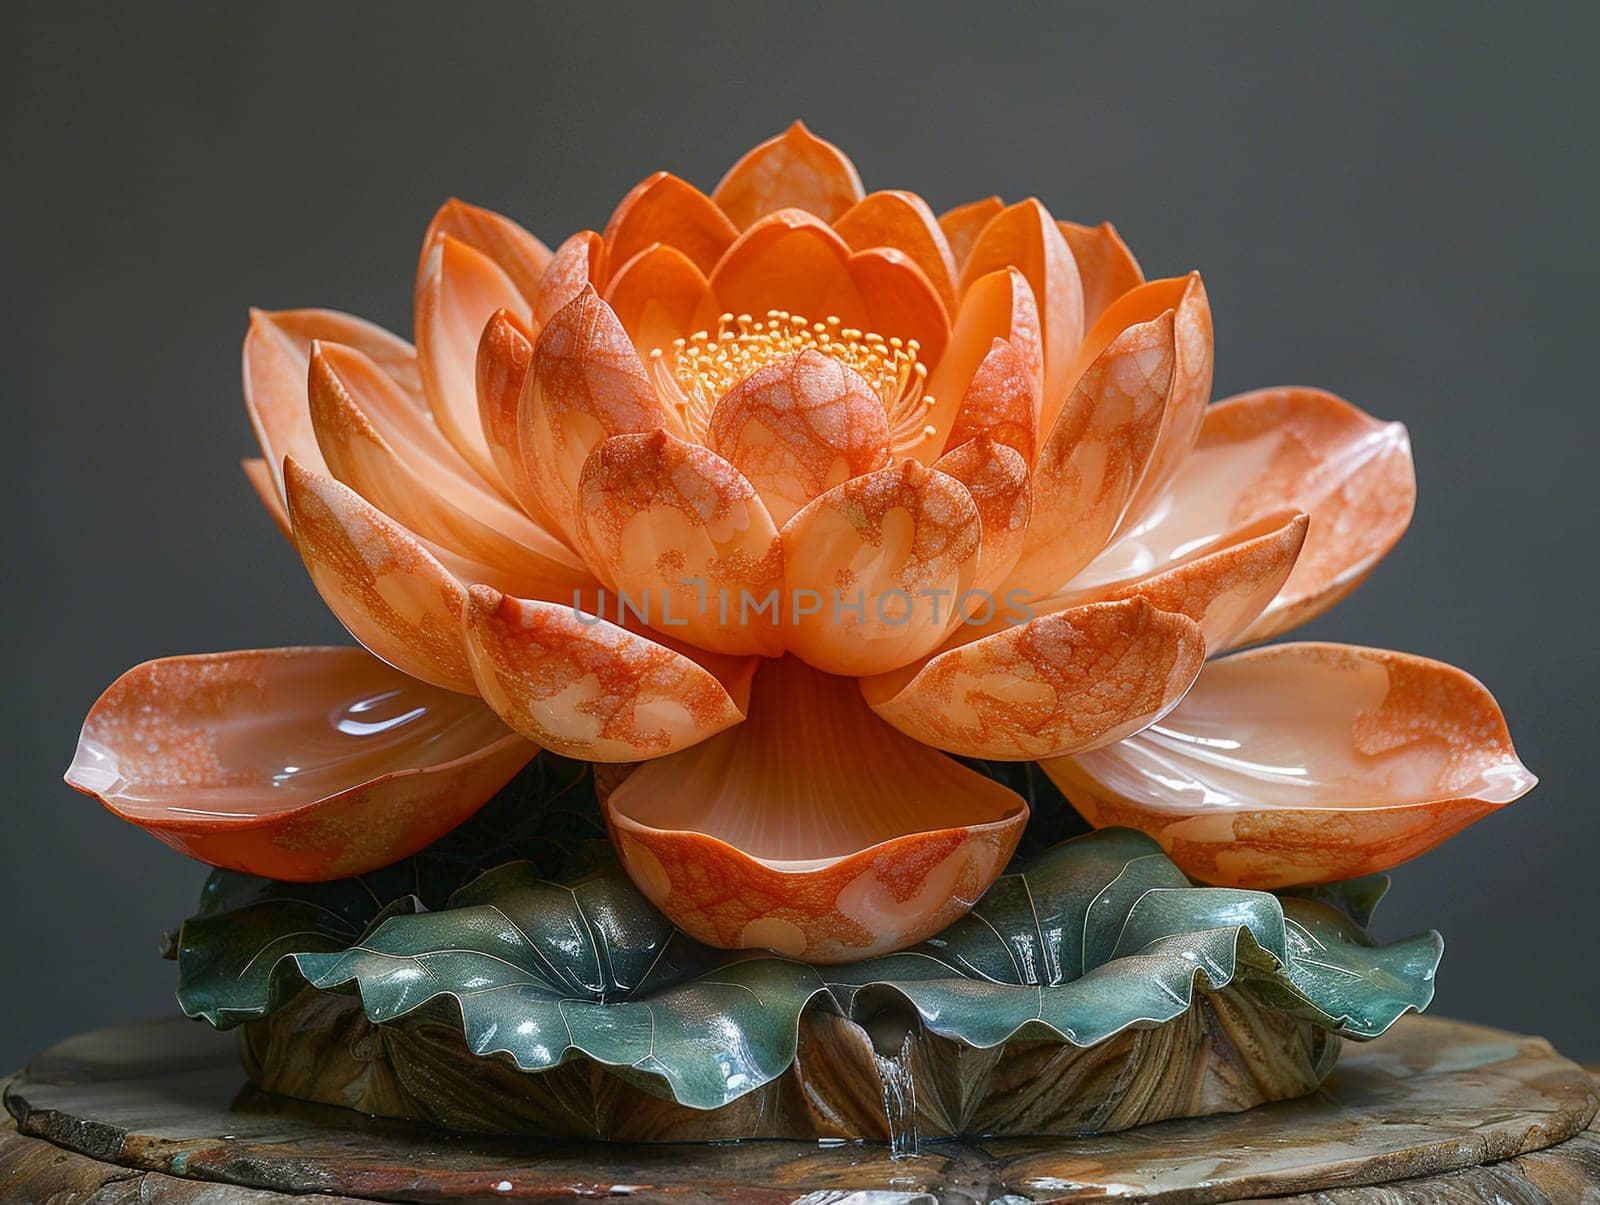 Buddhist Lotus Flower Sculpture Emerging from Water, The flower's shape softens into the surface, signifying purity and spiritual unfolding.